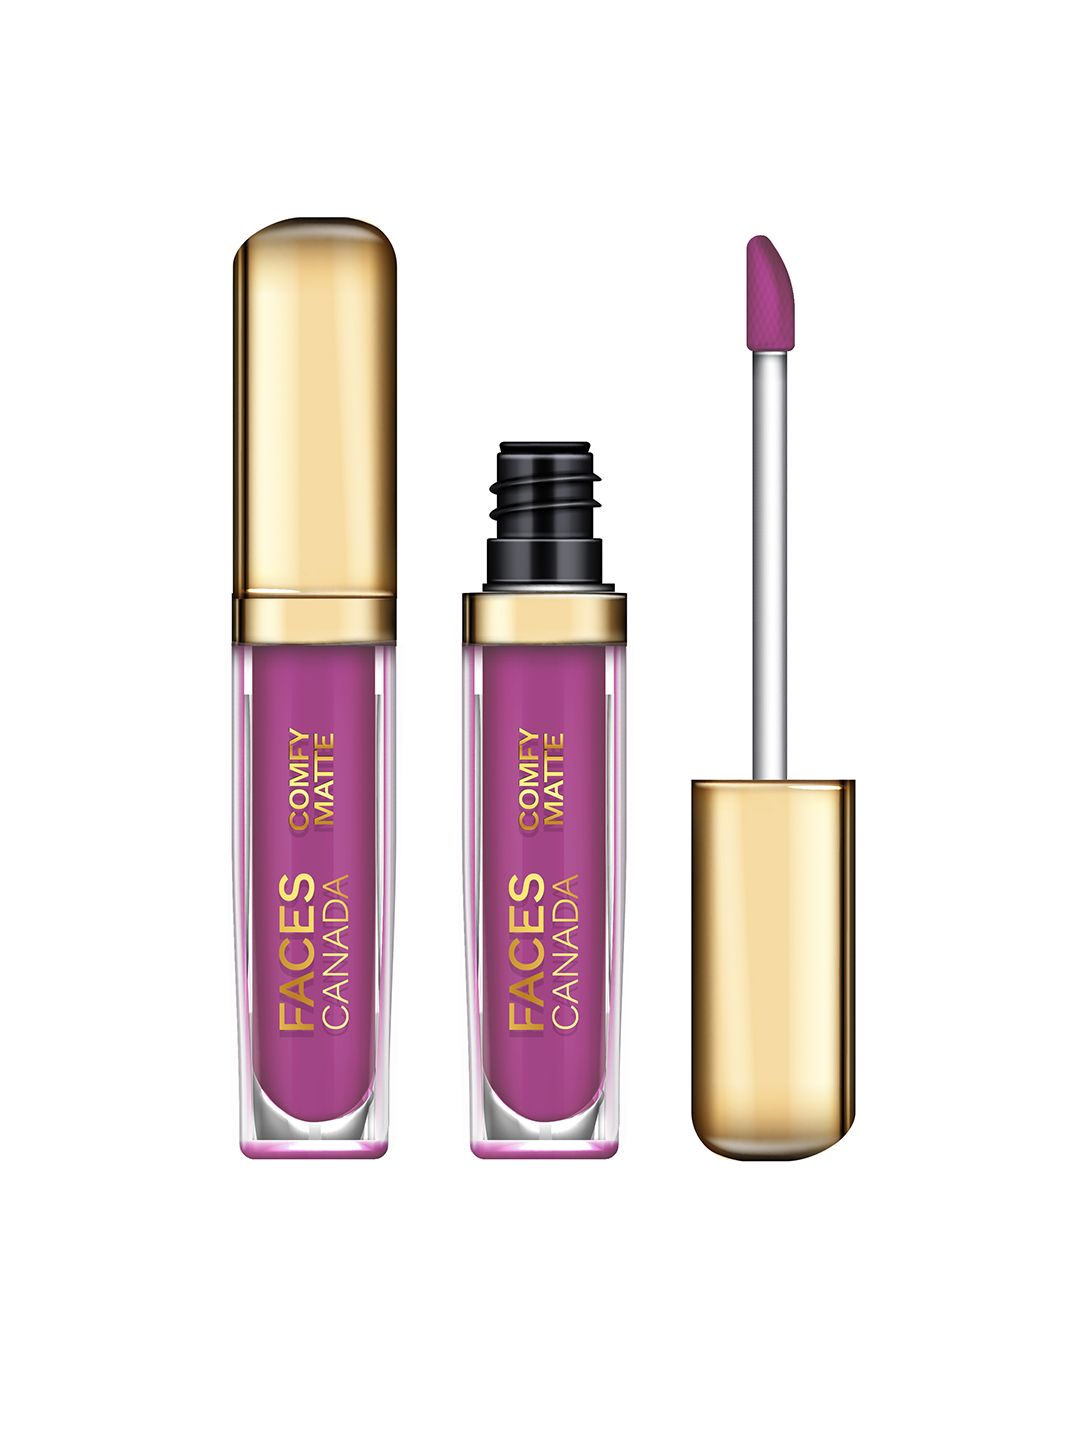 FACES CANADA Comfy Matte Lip Color 3 ml - End Of Story 03 Price in India